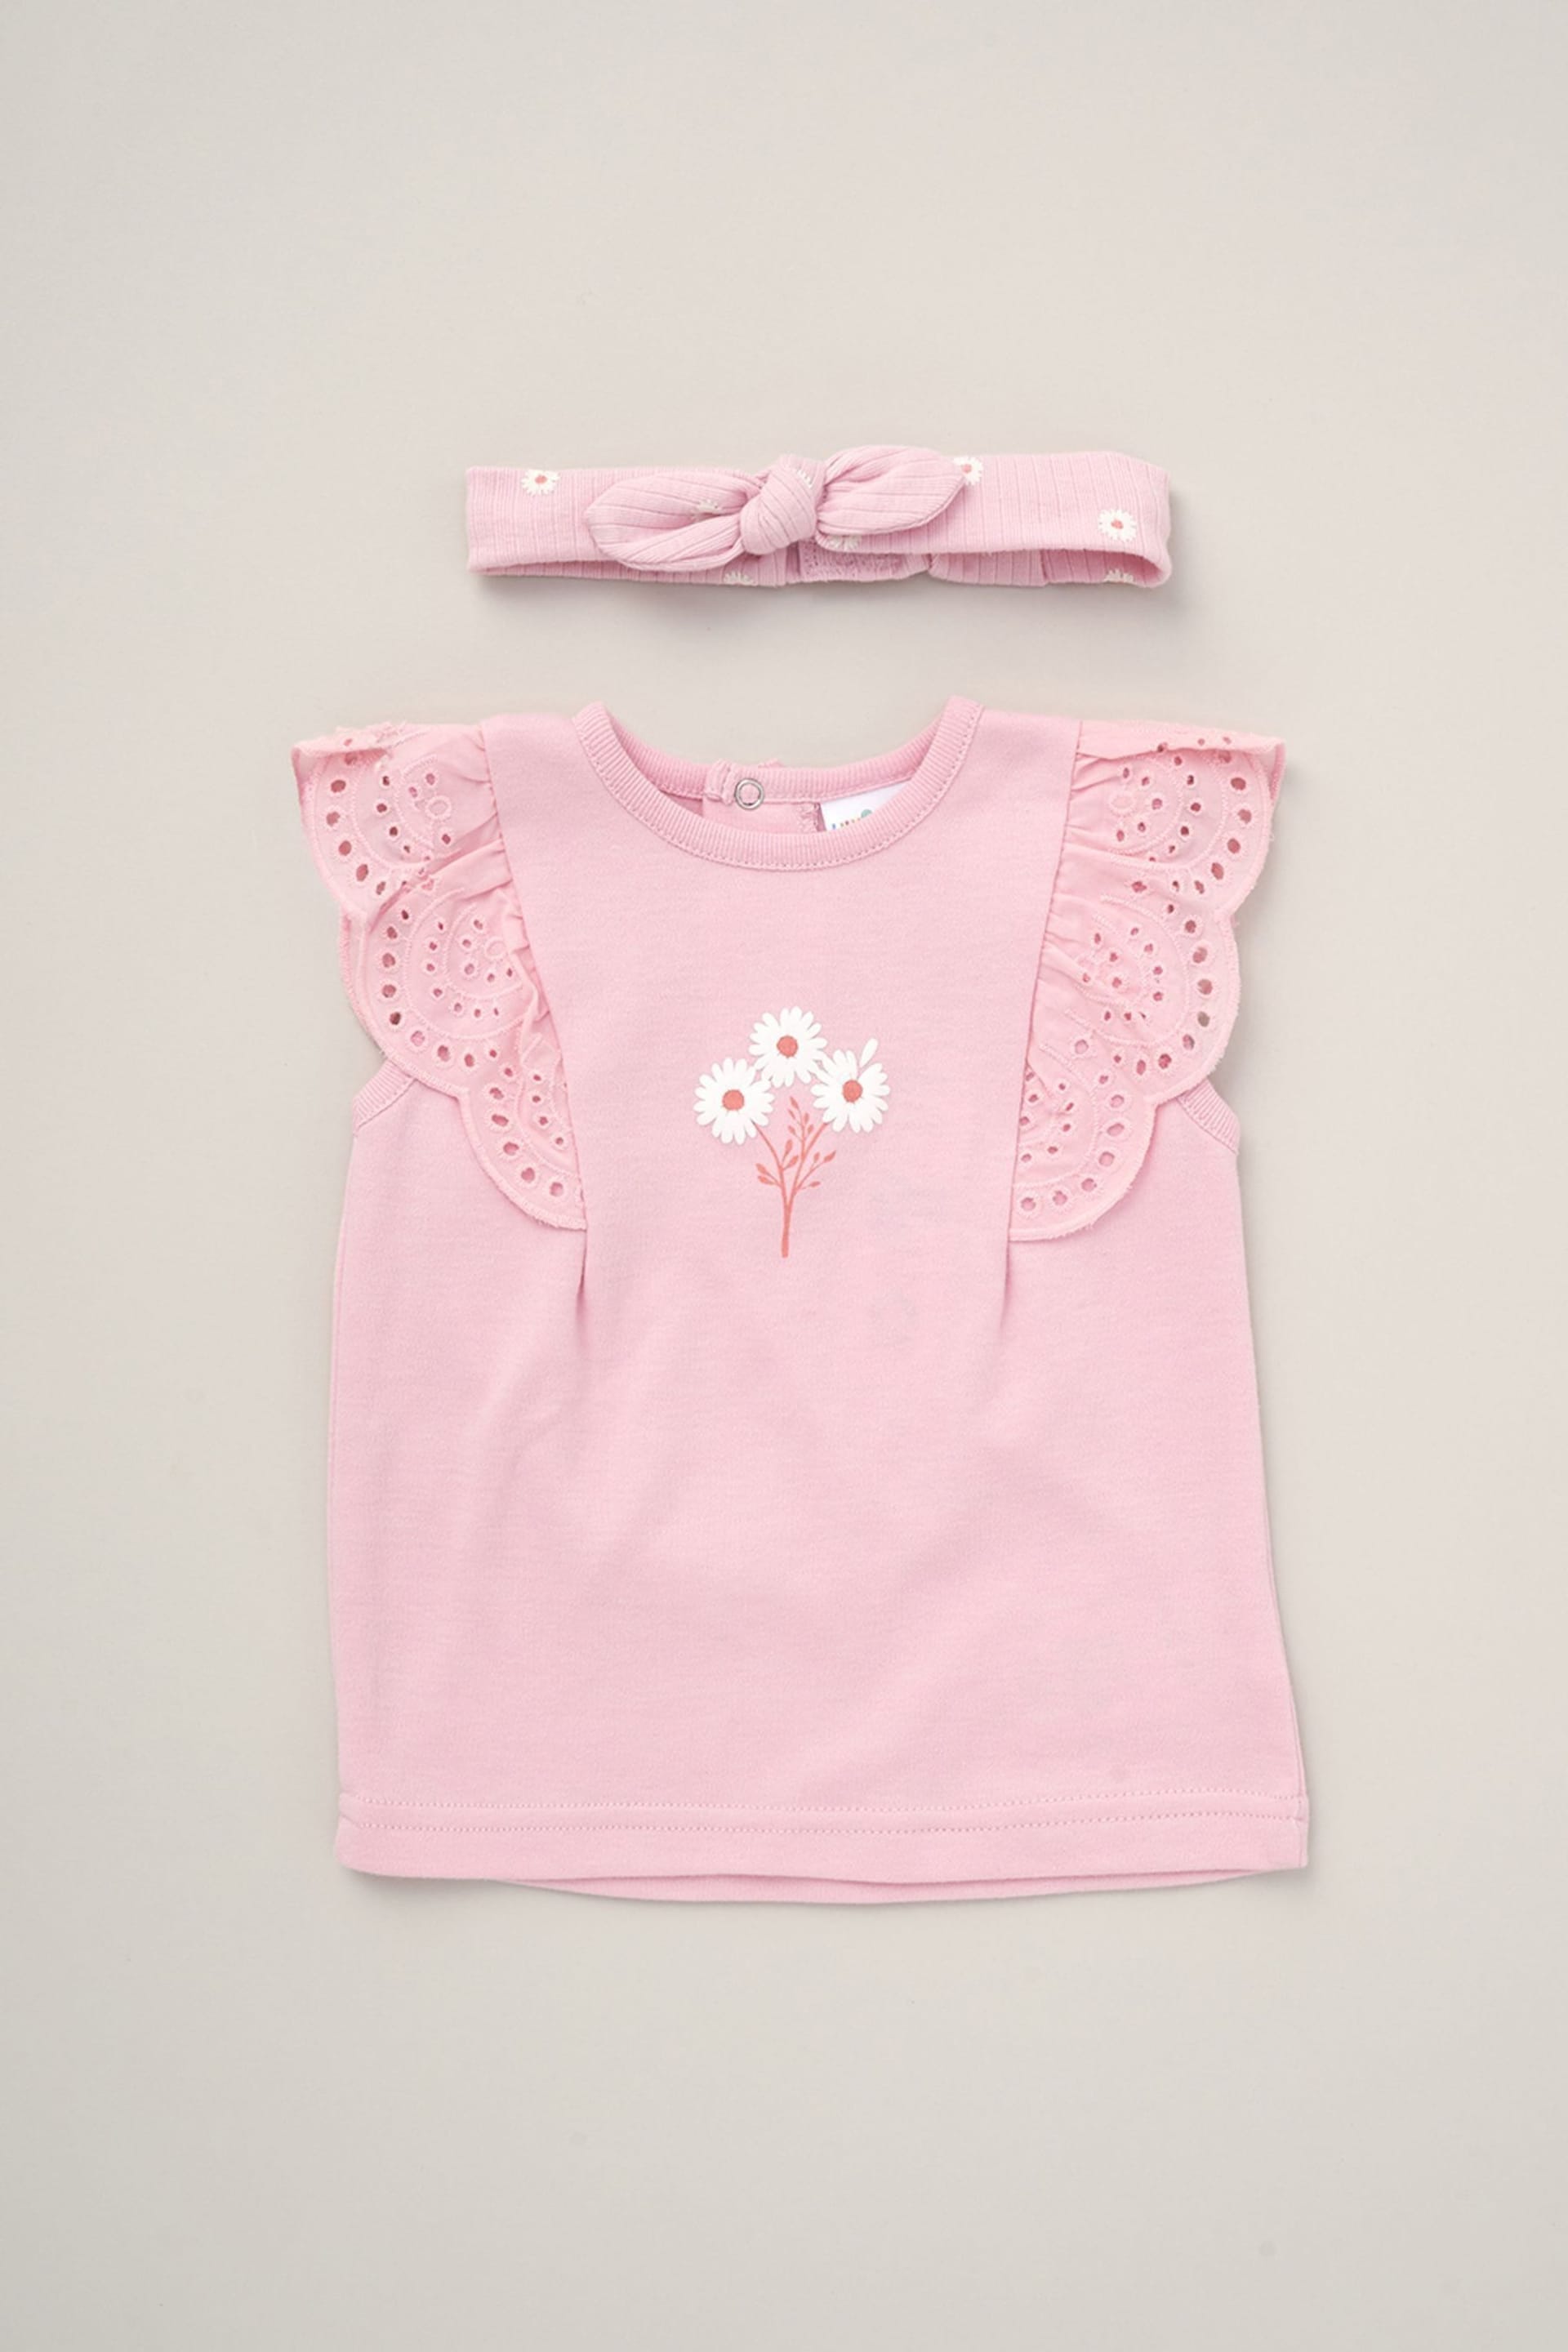 Lily & Jack Pink Broderie Detail Top Joggers And Headband Outfit Set 3 Piece - Image 3 of 5